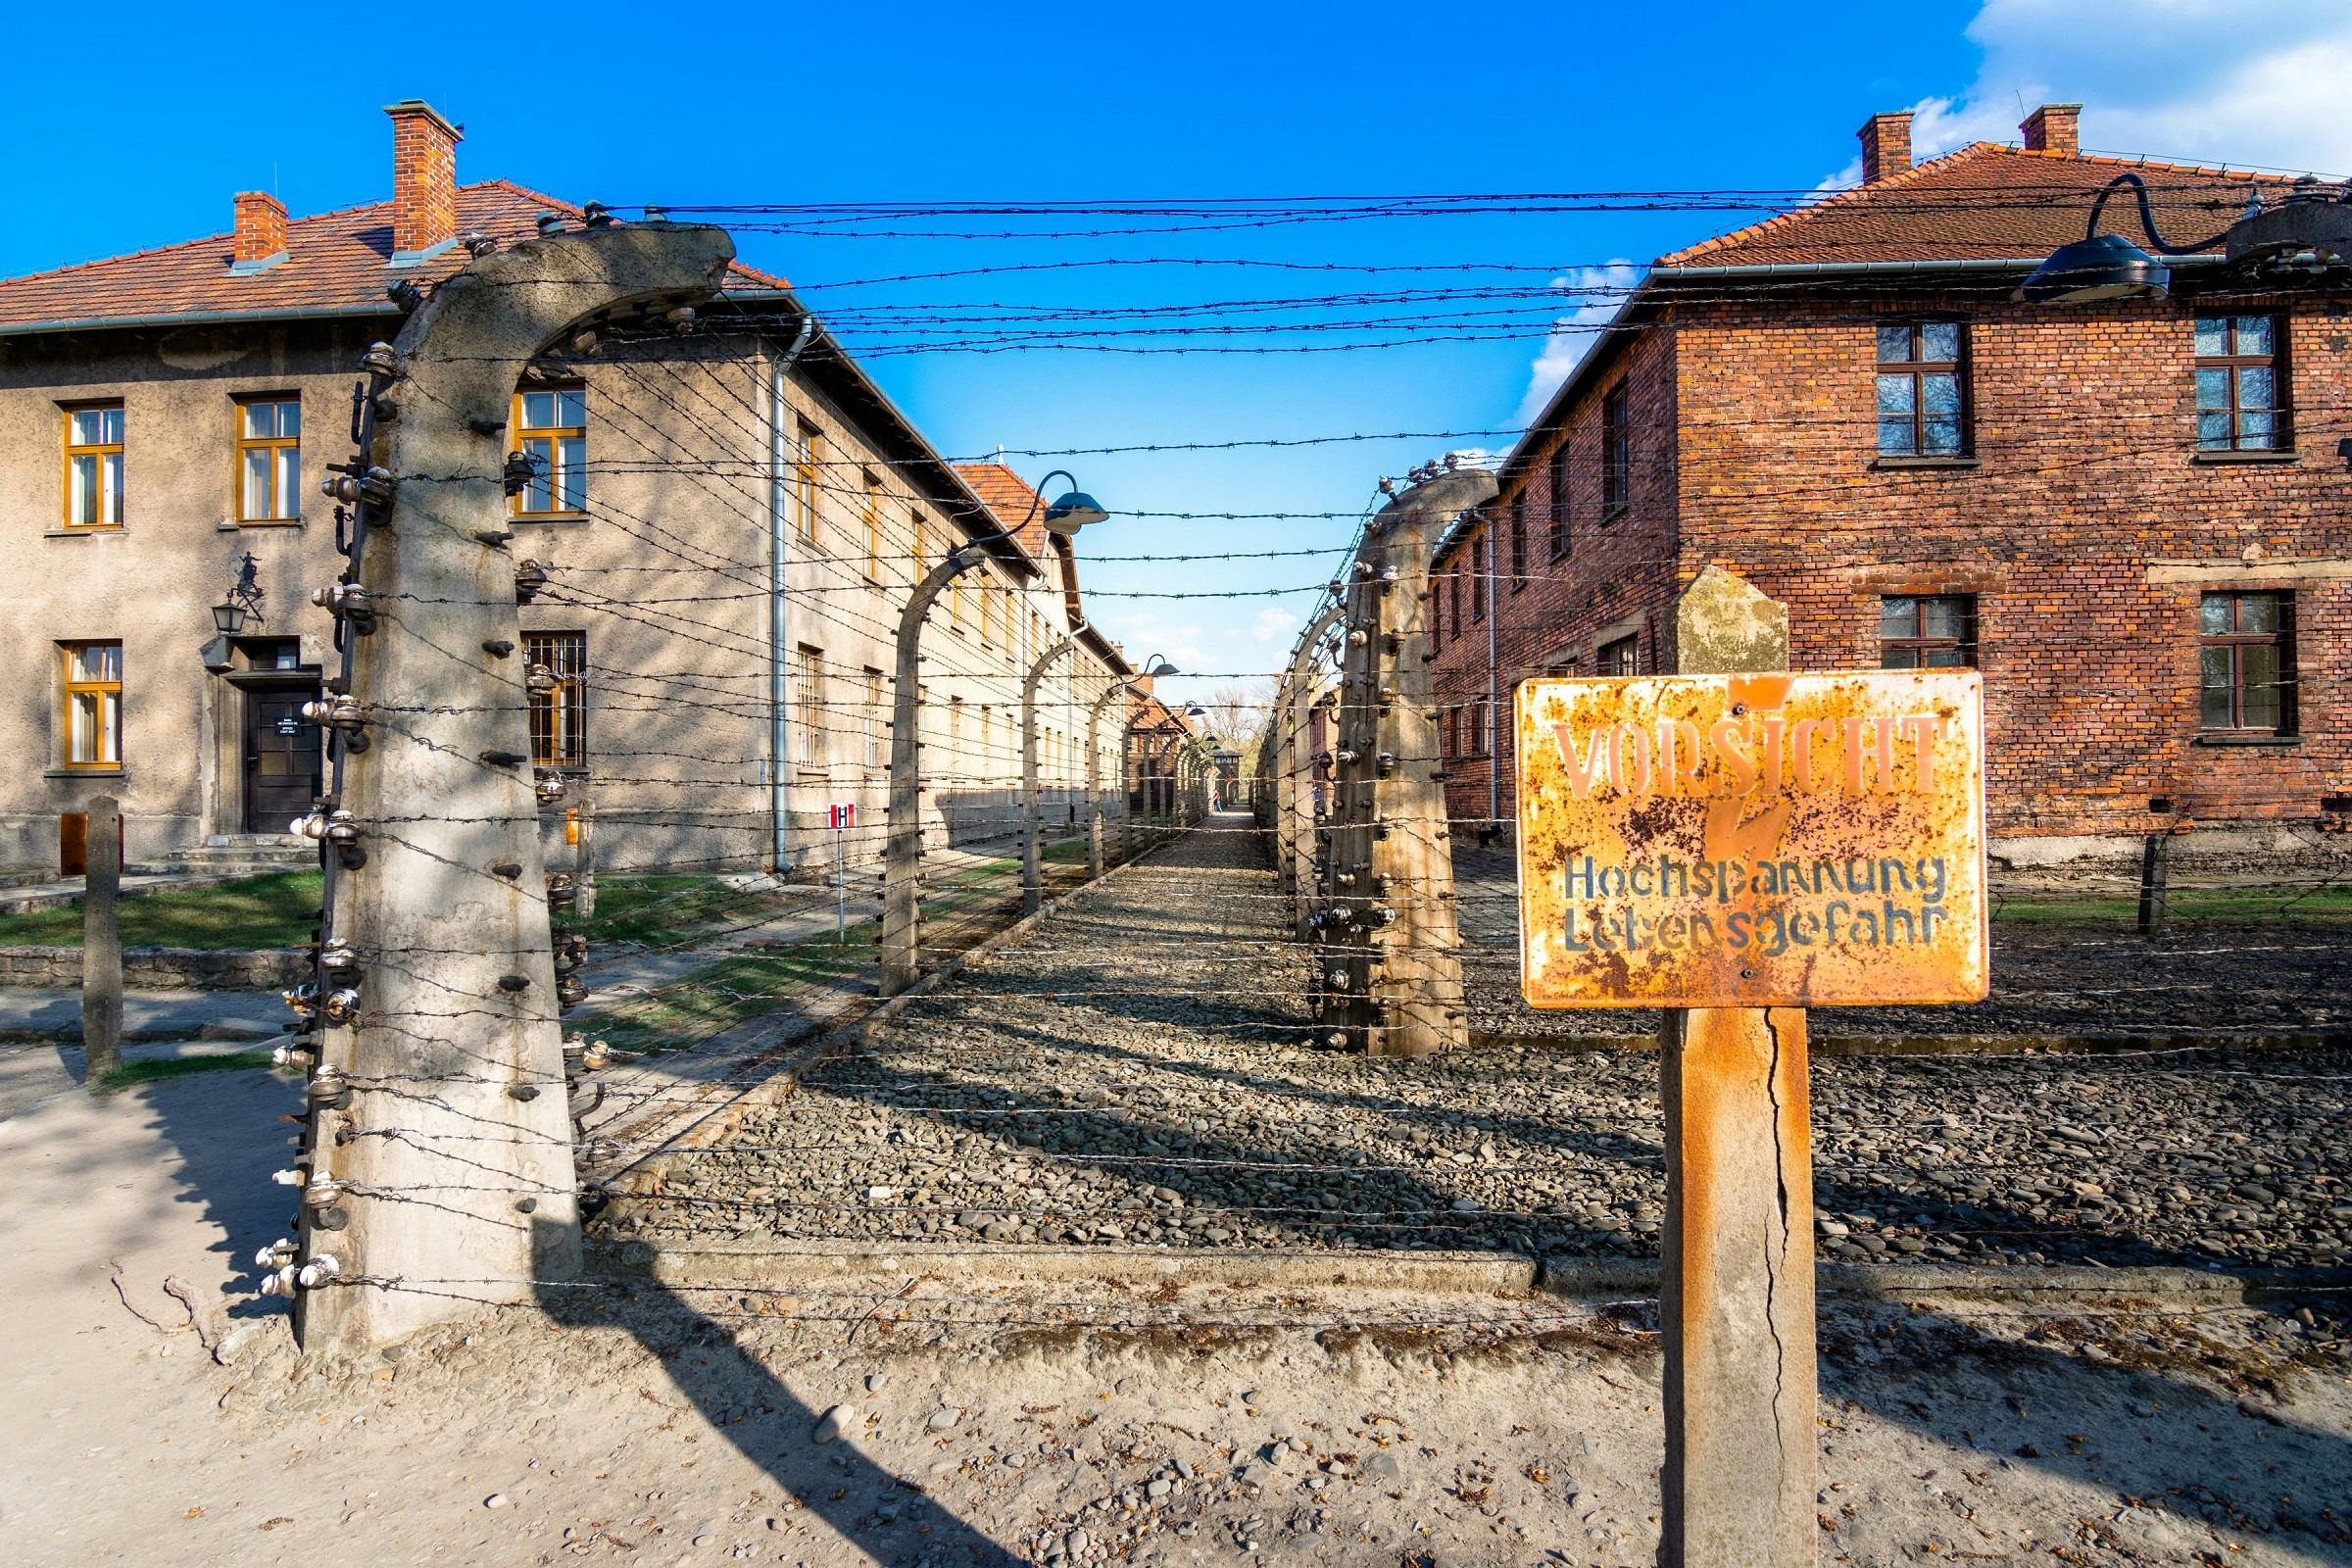 auschwitz guided tour or not